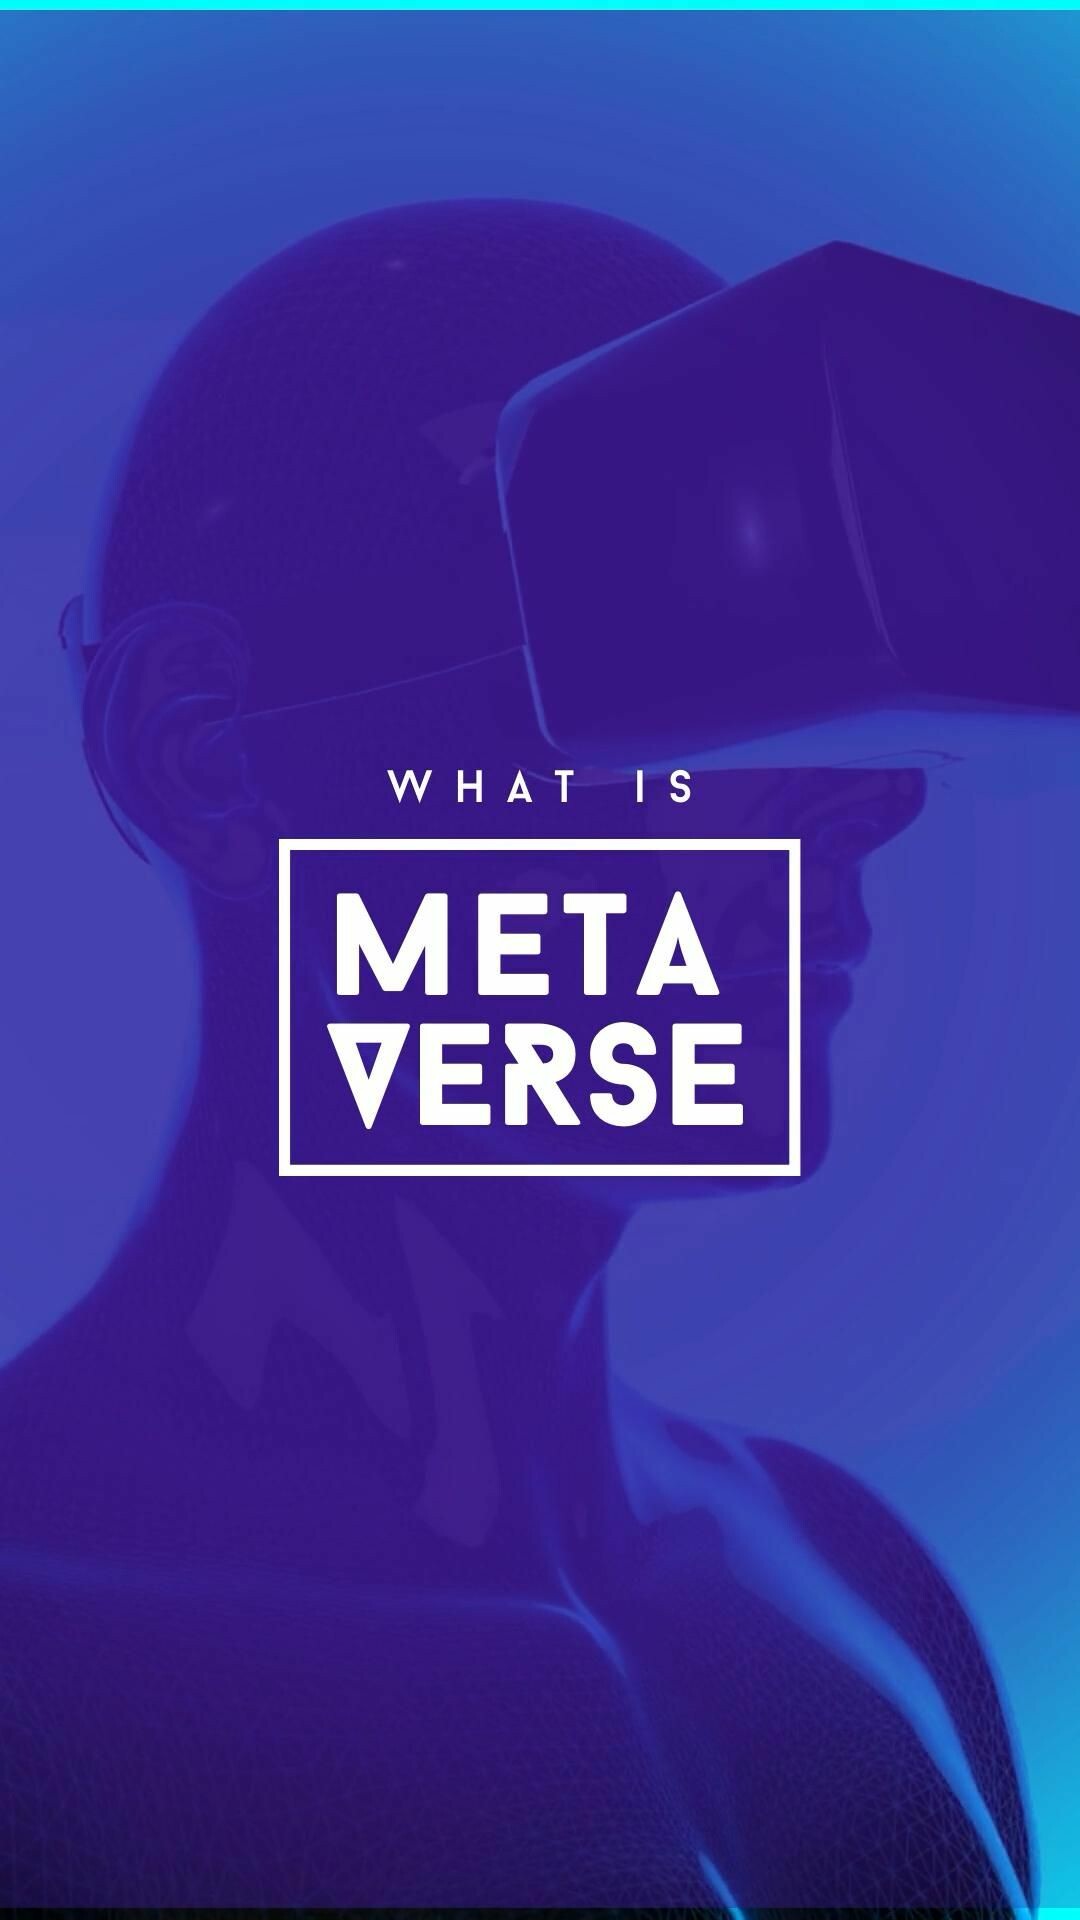 Metaverse 101, 4K wallpapers, Stunning visuals, Mobile wallpaper collection, 1080x1920 Full HD Handy